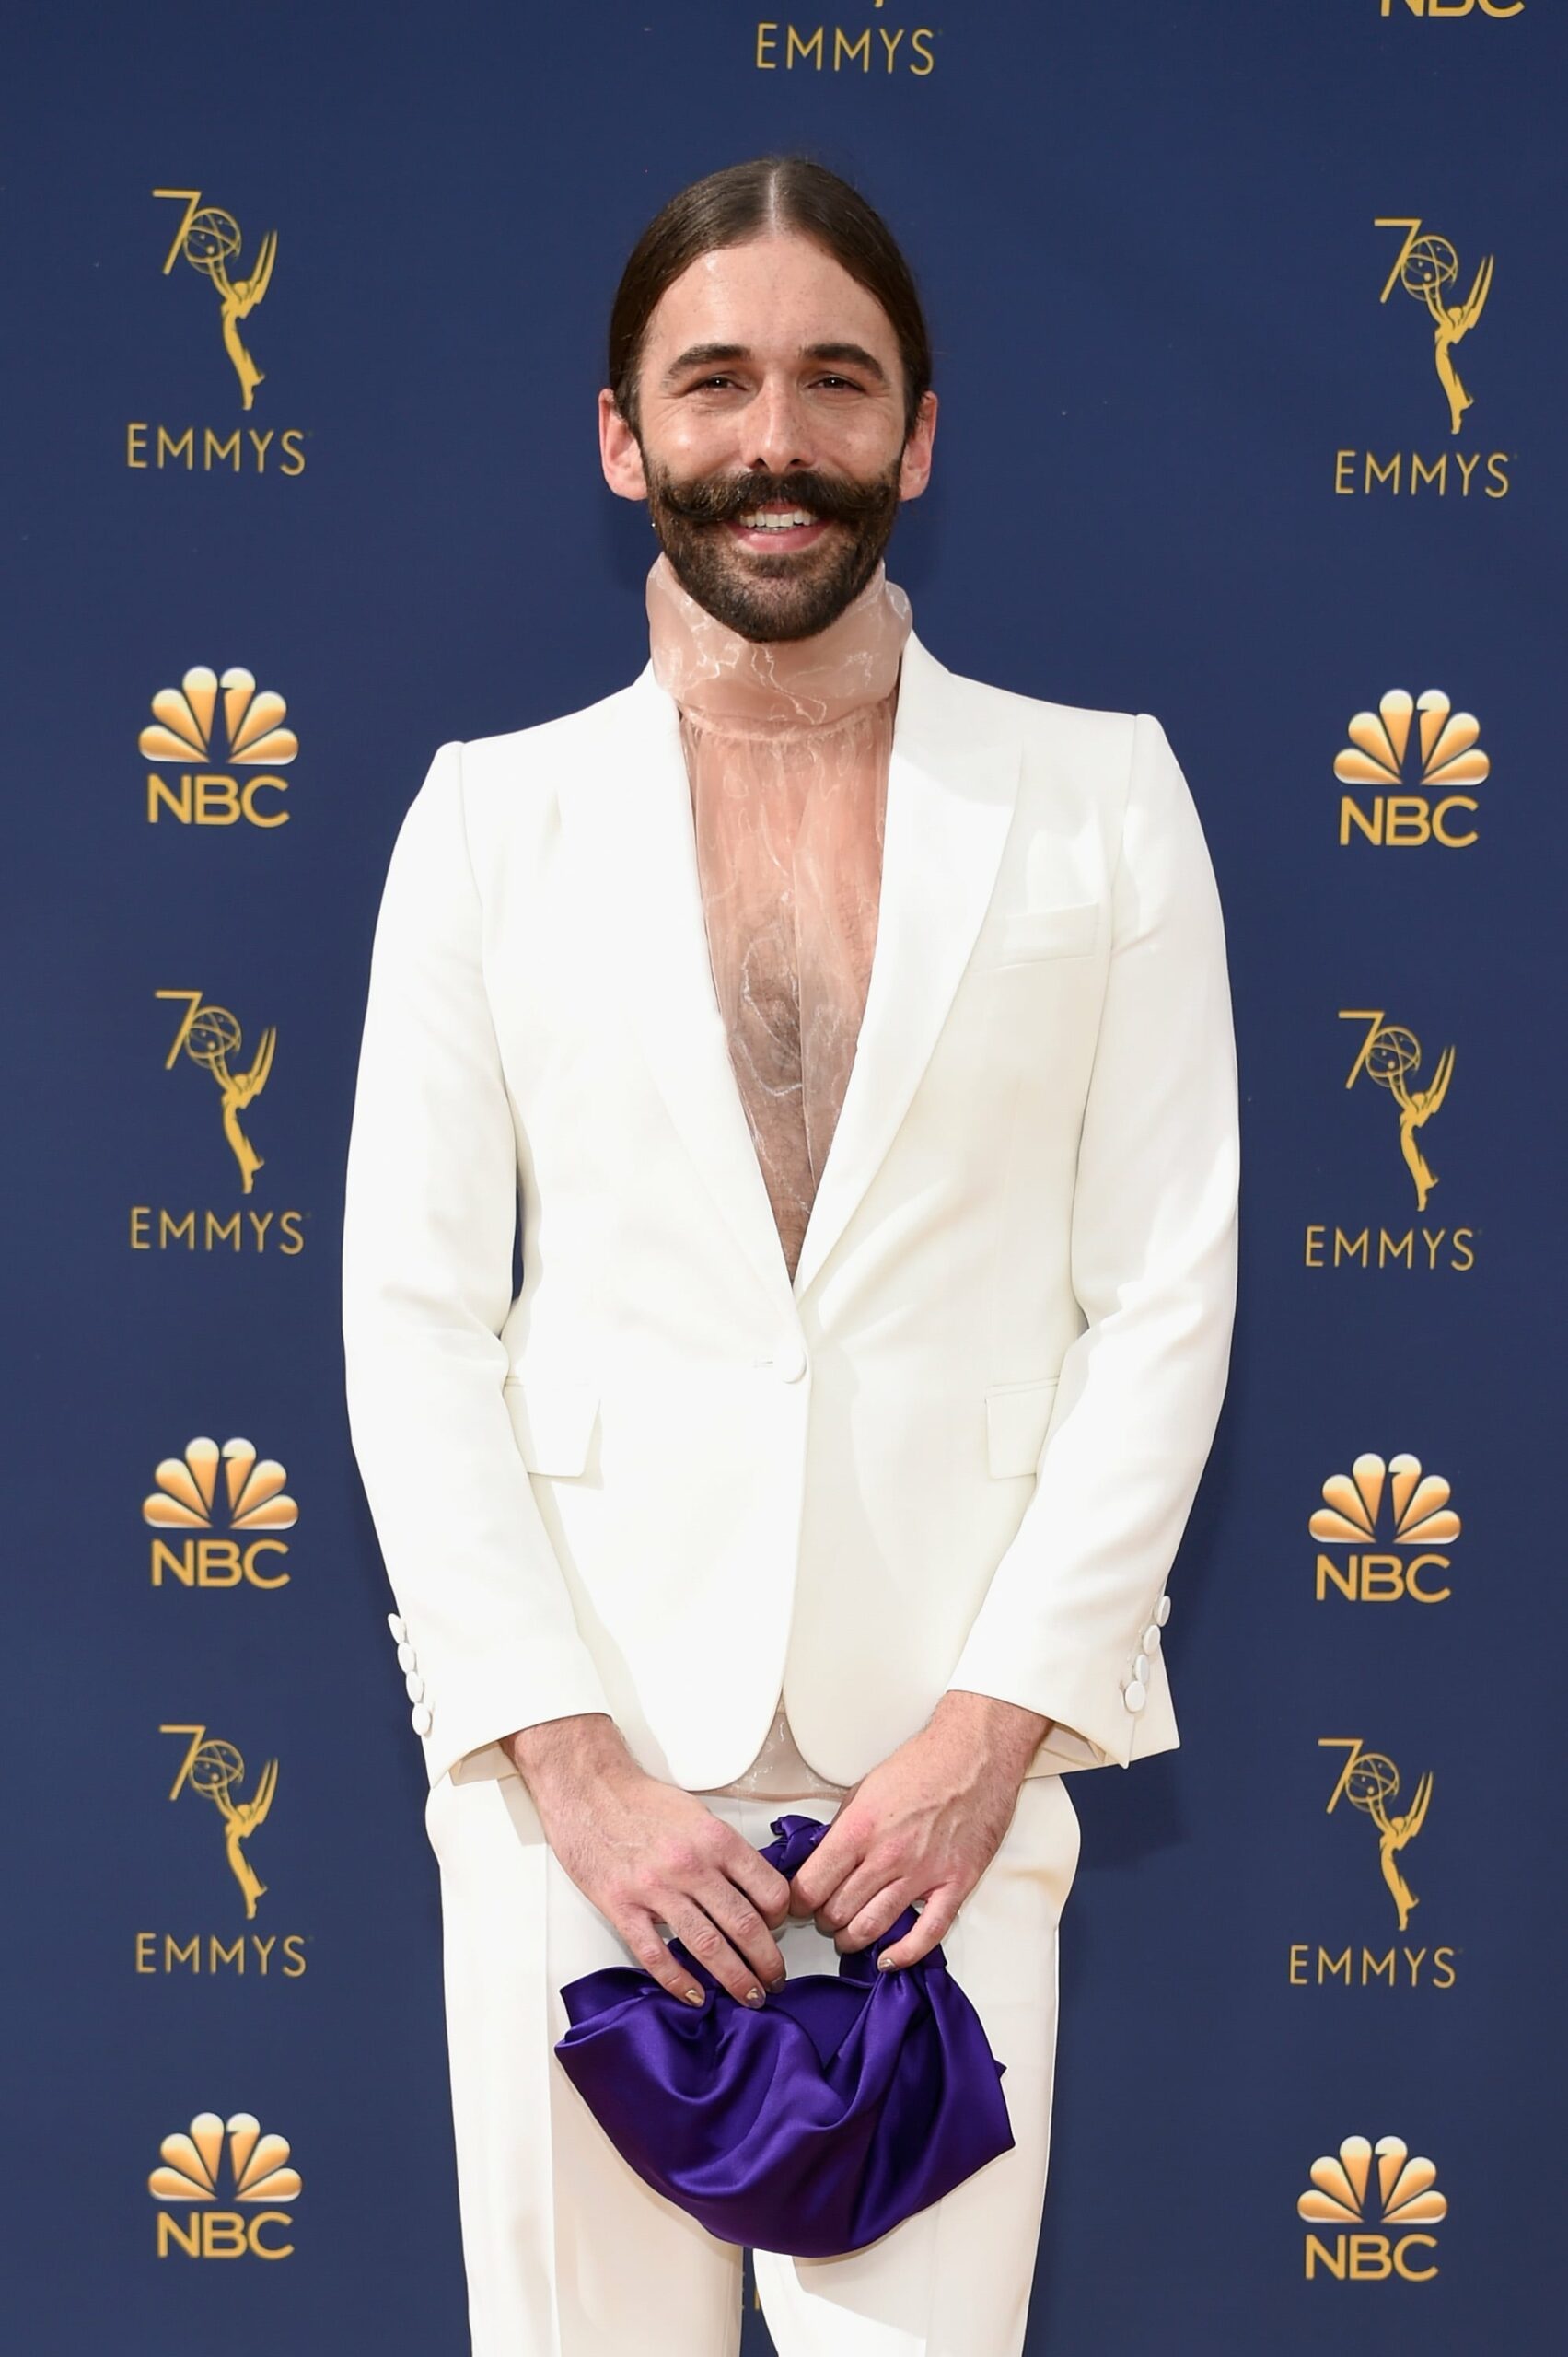 LOS ANGELES, CA - SEPTEMBER 17:  Jonathan Van Ness attends the 70th Emmy Awards at Microsoft Theater on September 17, 2018 in Los Angeles, California.  (Photo by Kevin Mazur/Getty Images)